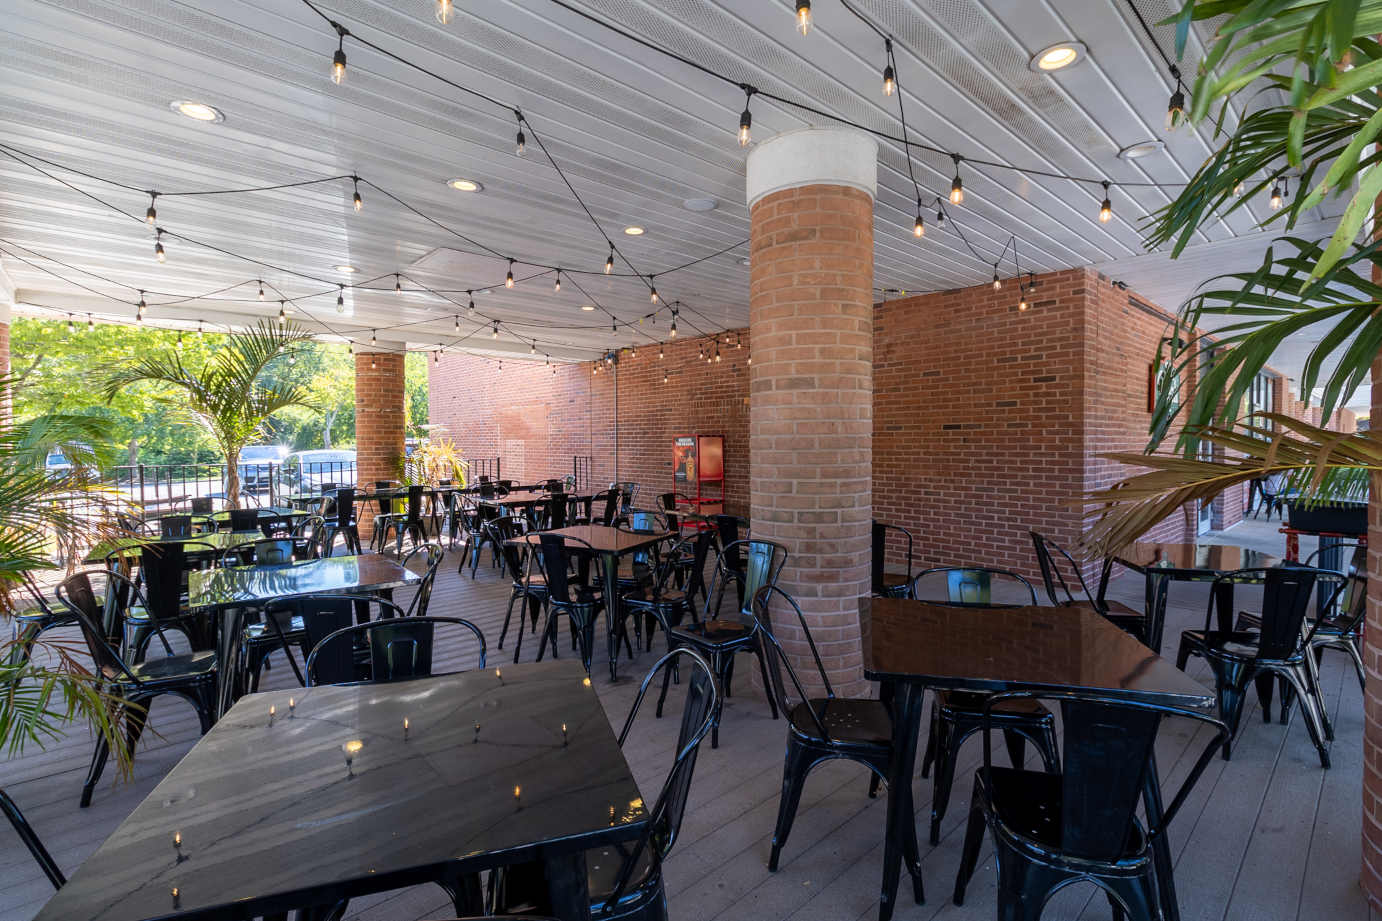 Covered outdoor seating area